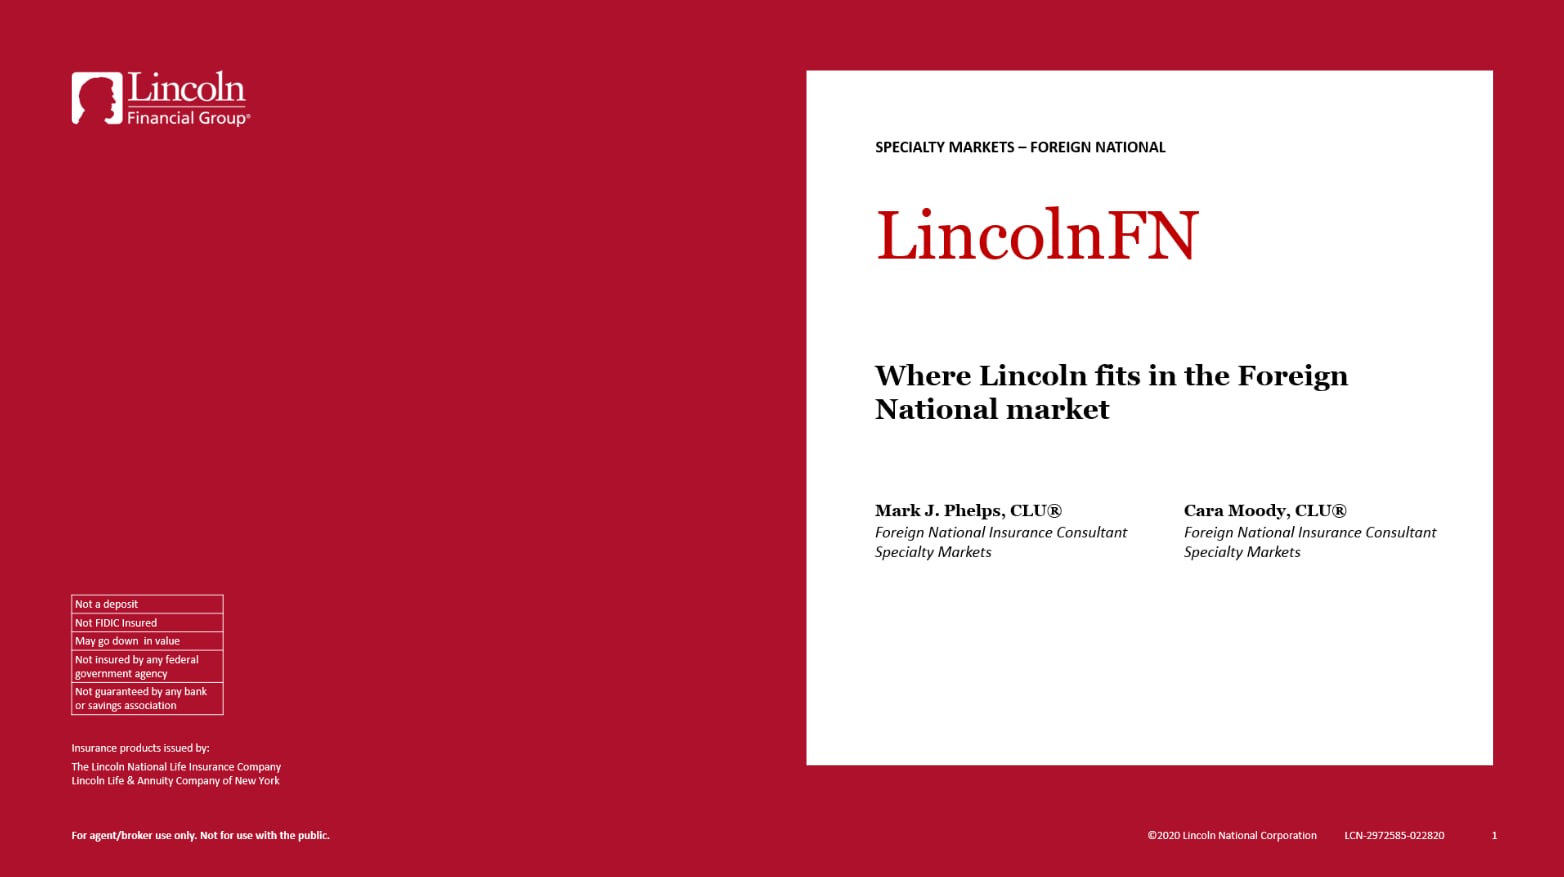 Where Lincoln fits in the Foreign National market